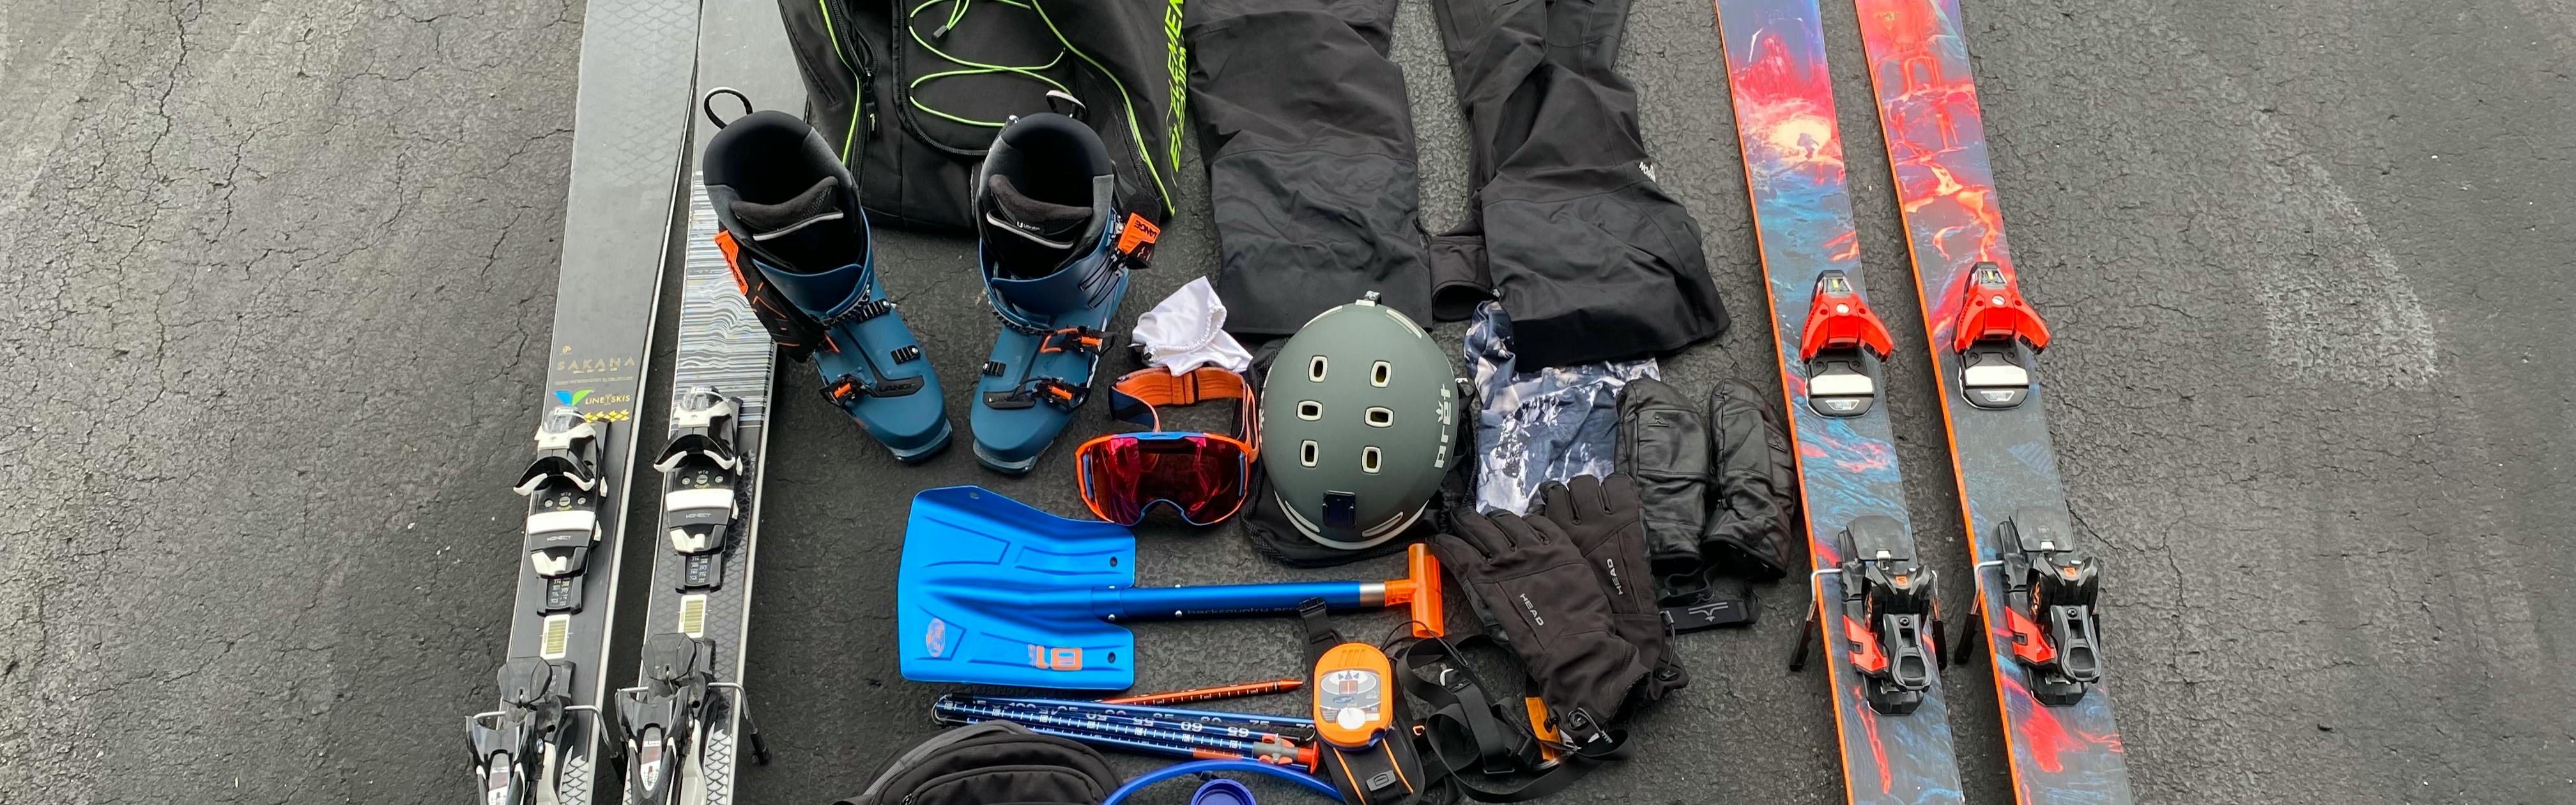 How to Travel Carry-On Only for a Ski Trip - AFAR